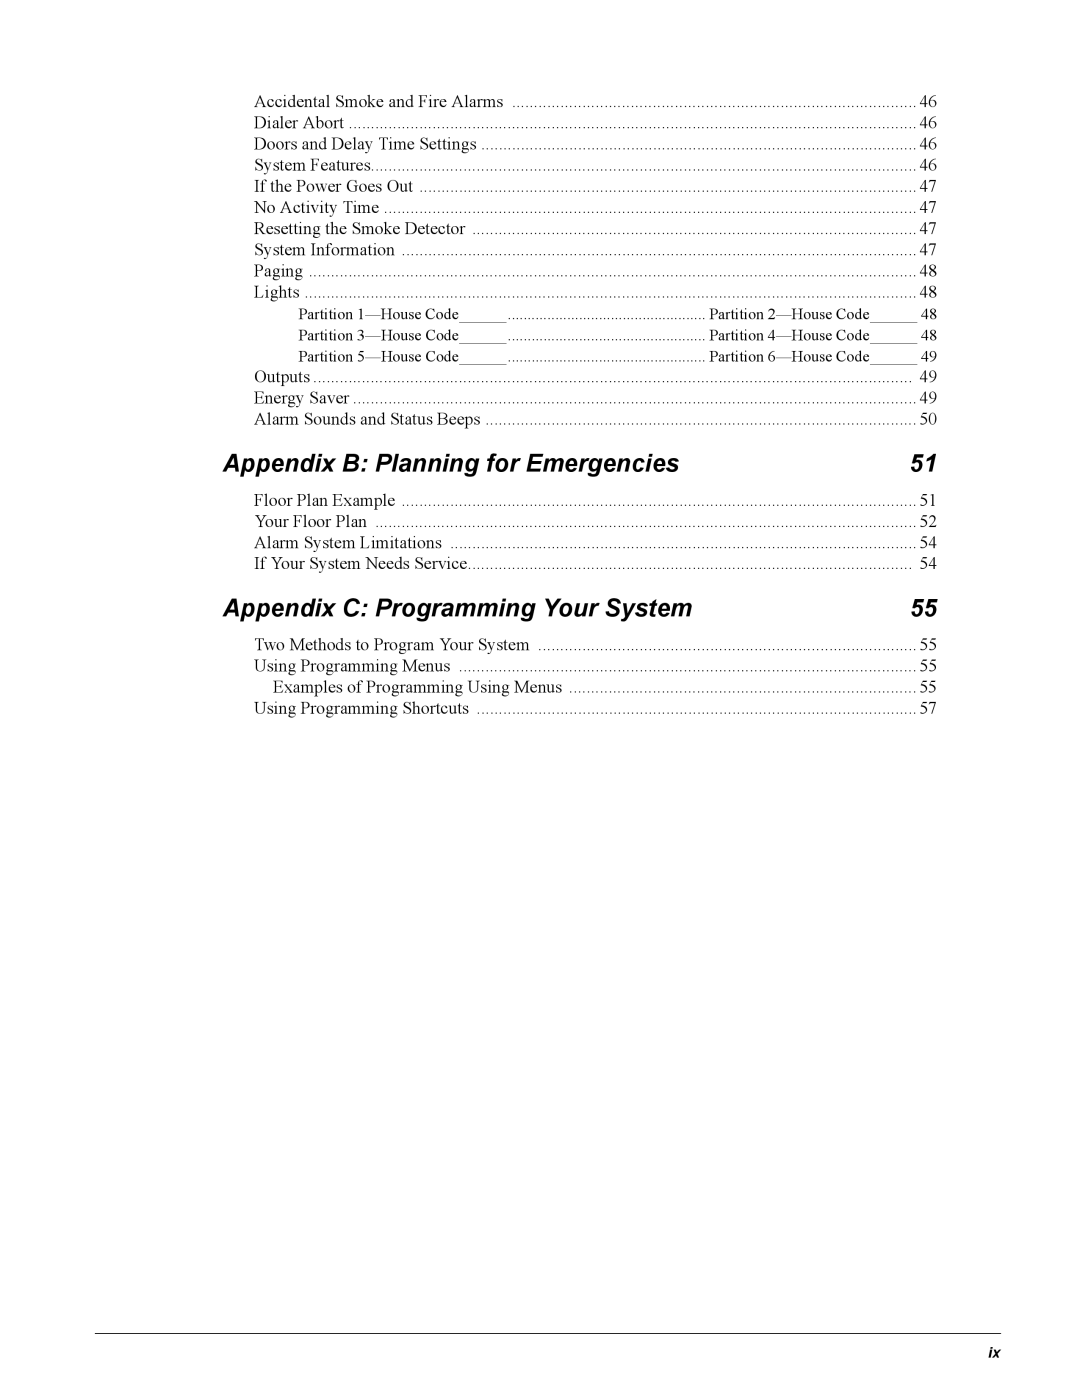 GE Concord 4 manual Appendix B Planning for Emergencies, Appendix C Programming Your System 